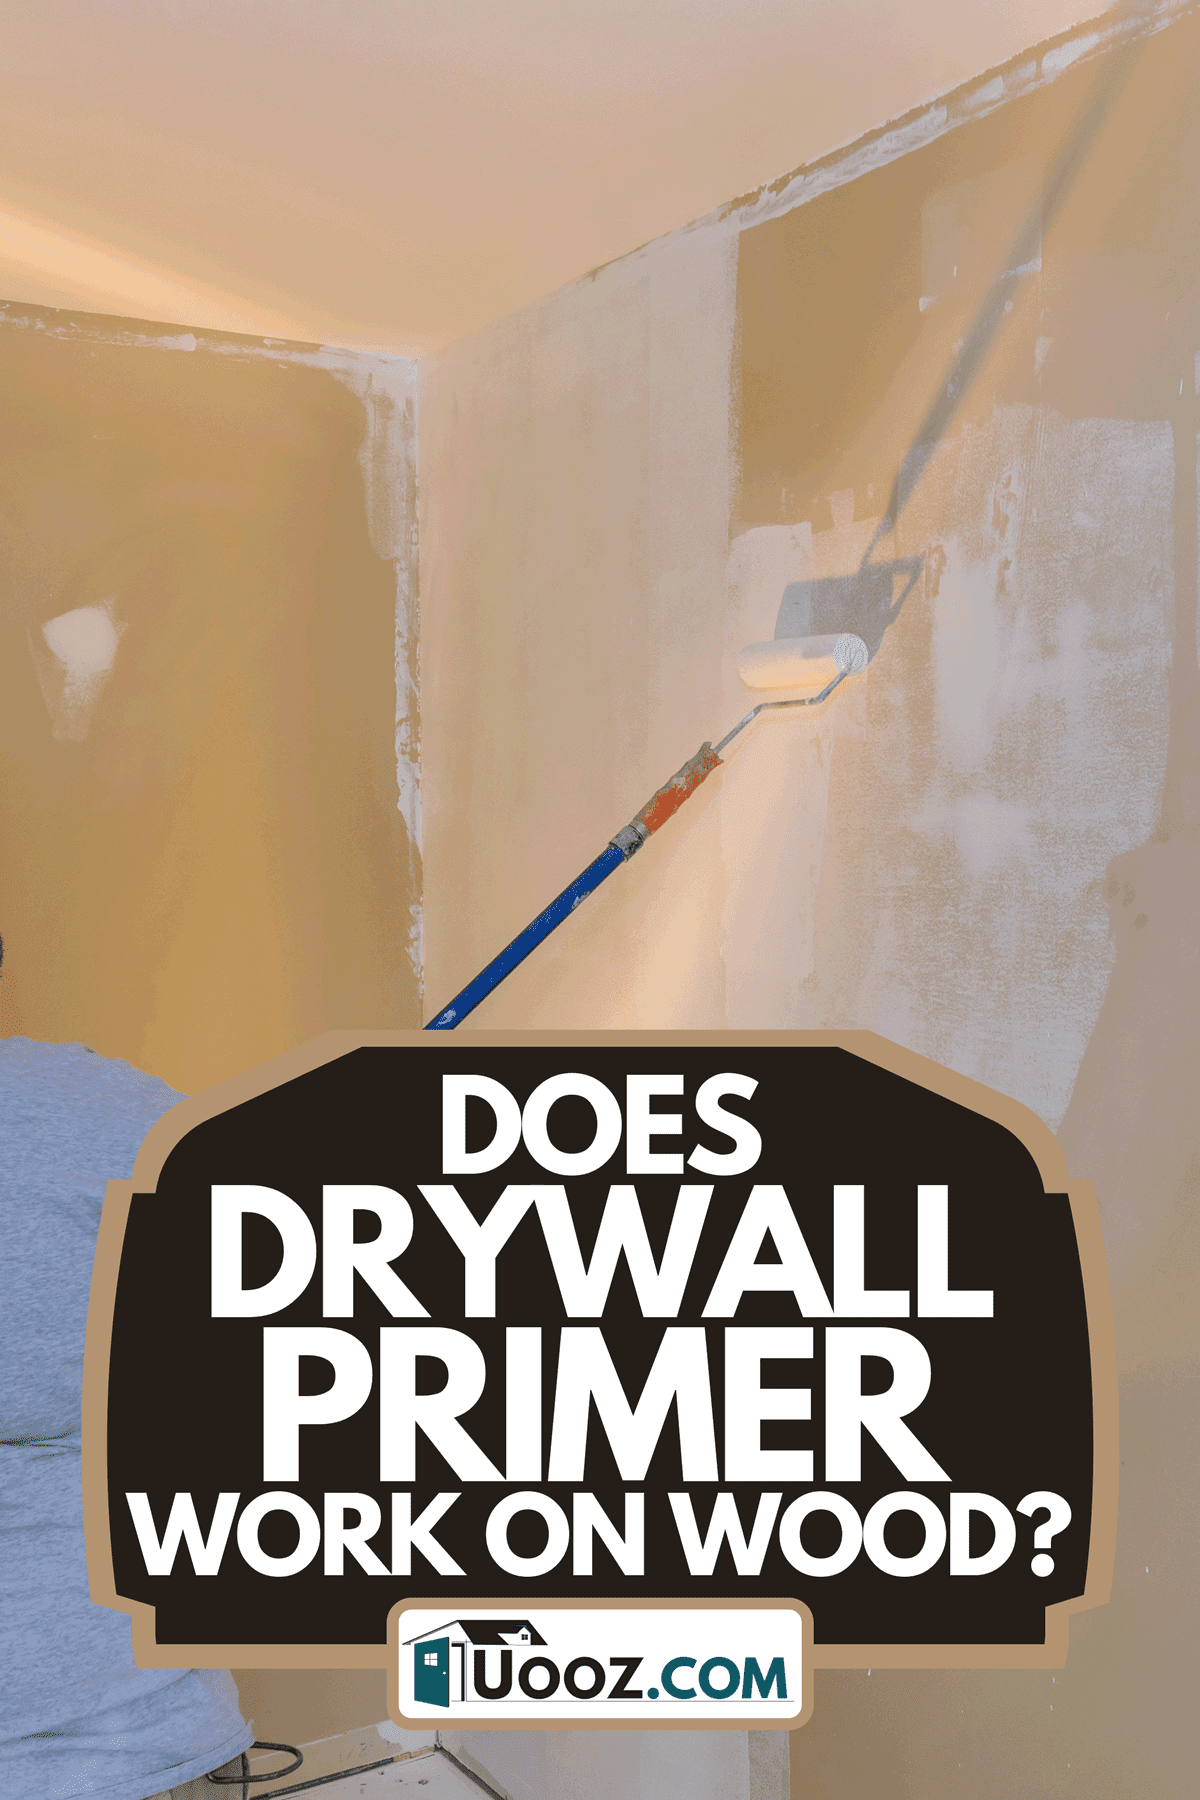 A worker priming with a paint roller, Does Drywall Primer Work On Wood?